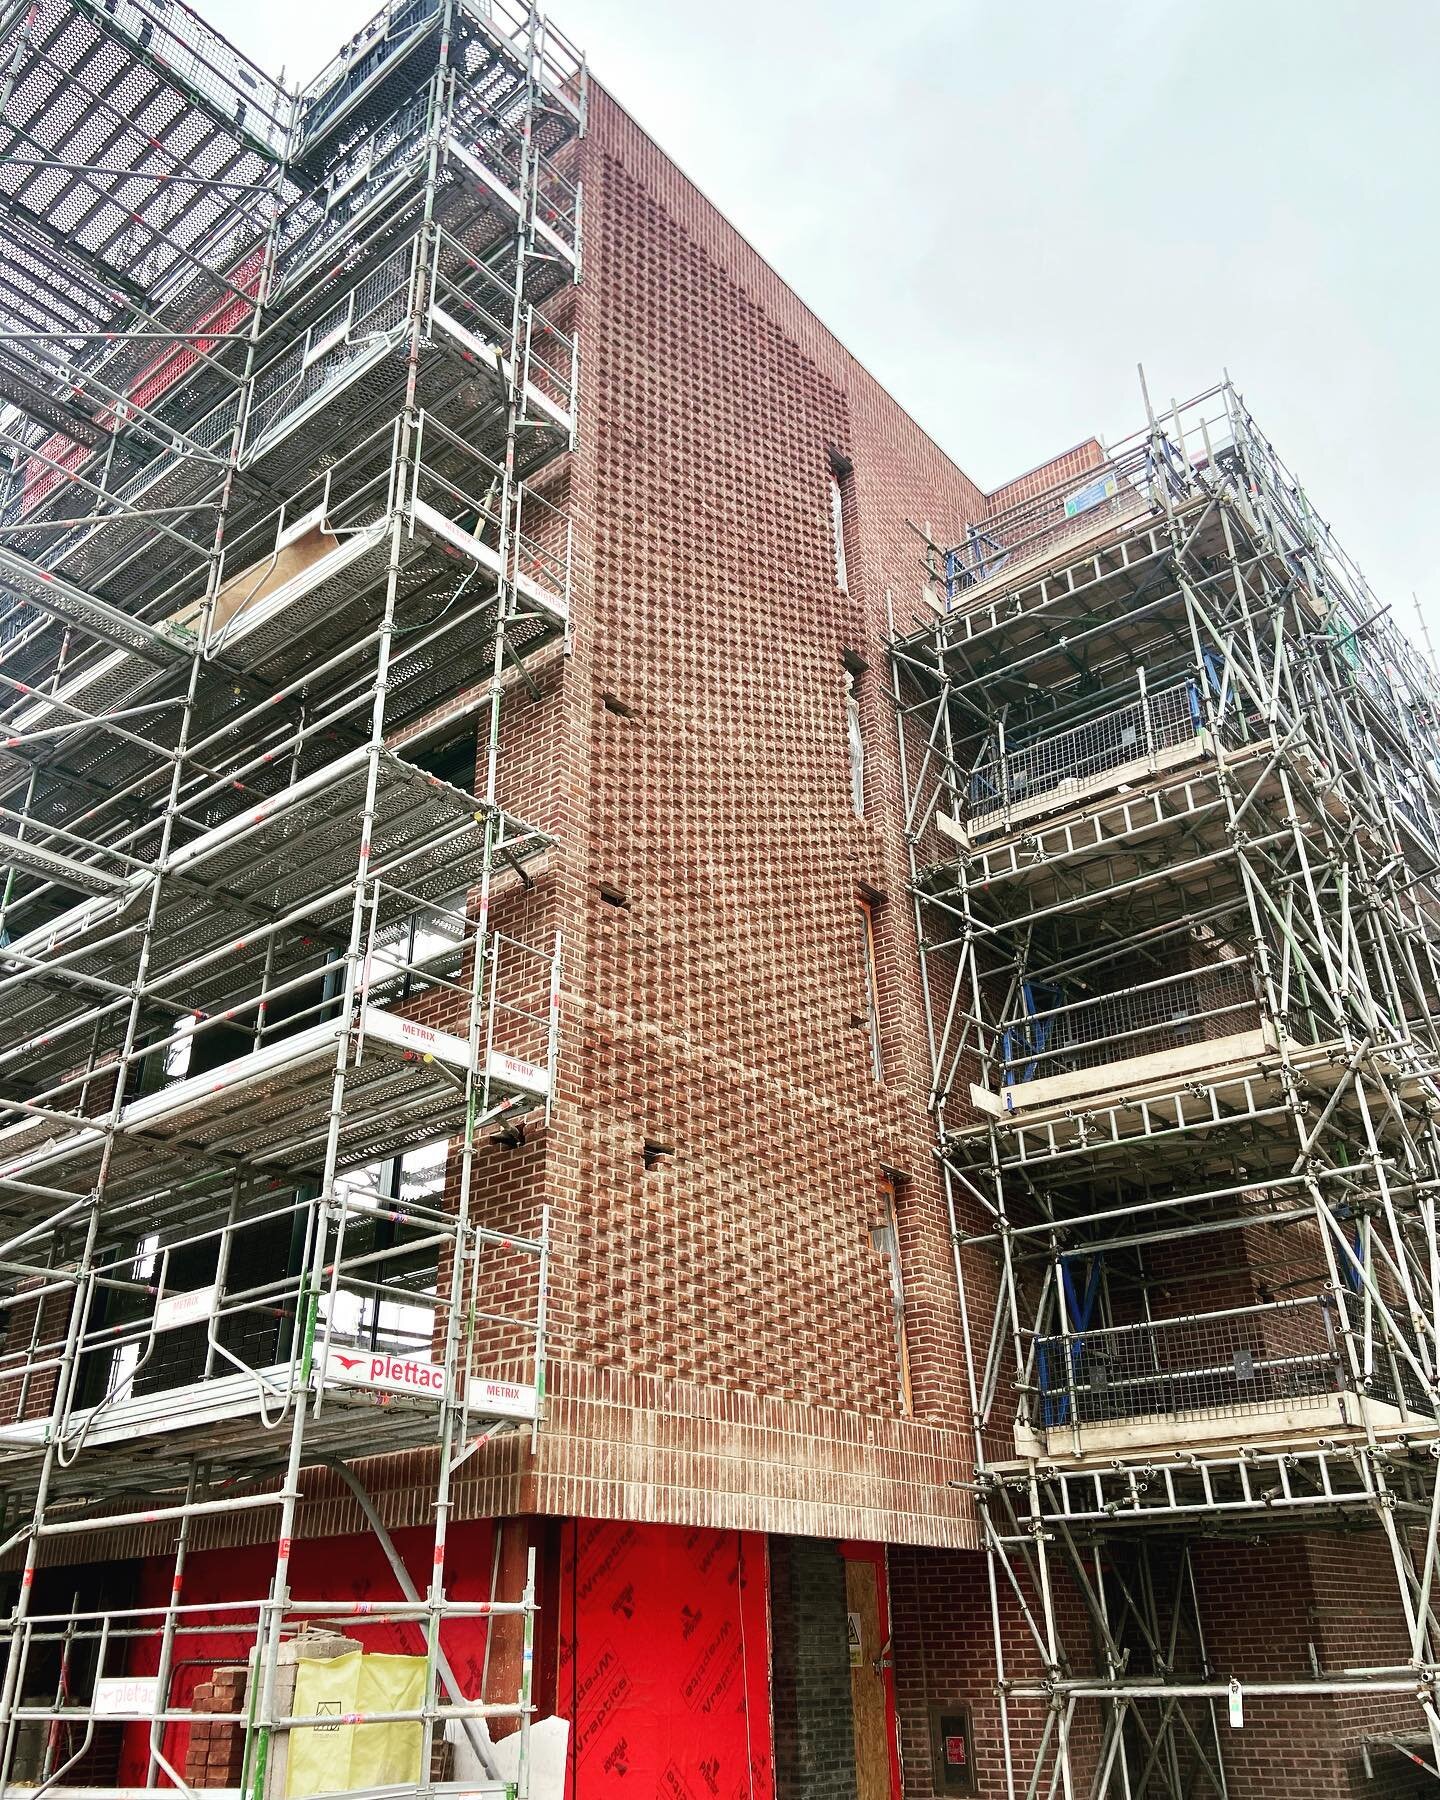 Winnall Flats - site progress.
Projecting header and soldier course stack bond brick detailing progressing.
Stack bond brick slips installed in readiness for sliding solar screen installation.
#construction
#onsite
#winchesterarchitects 
#brickdetail